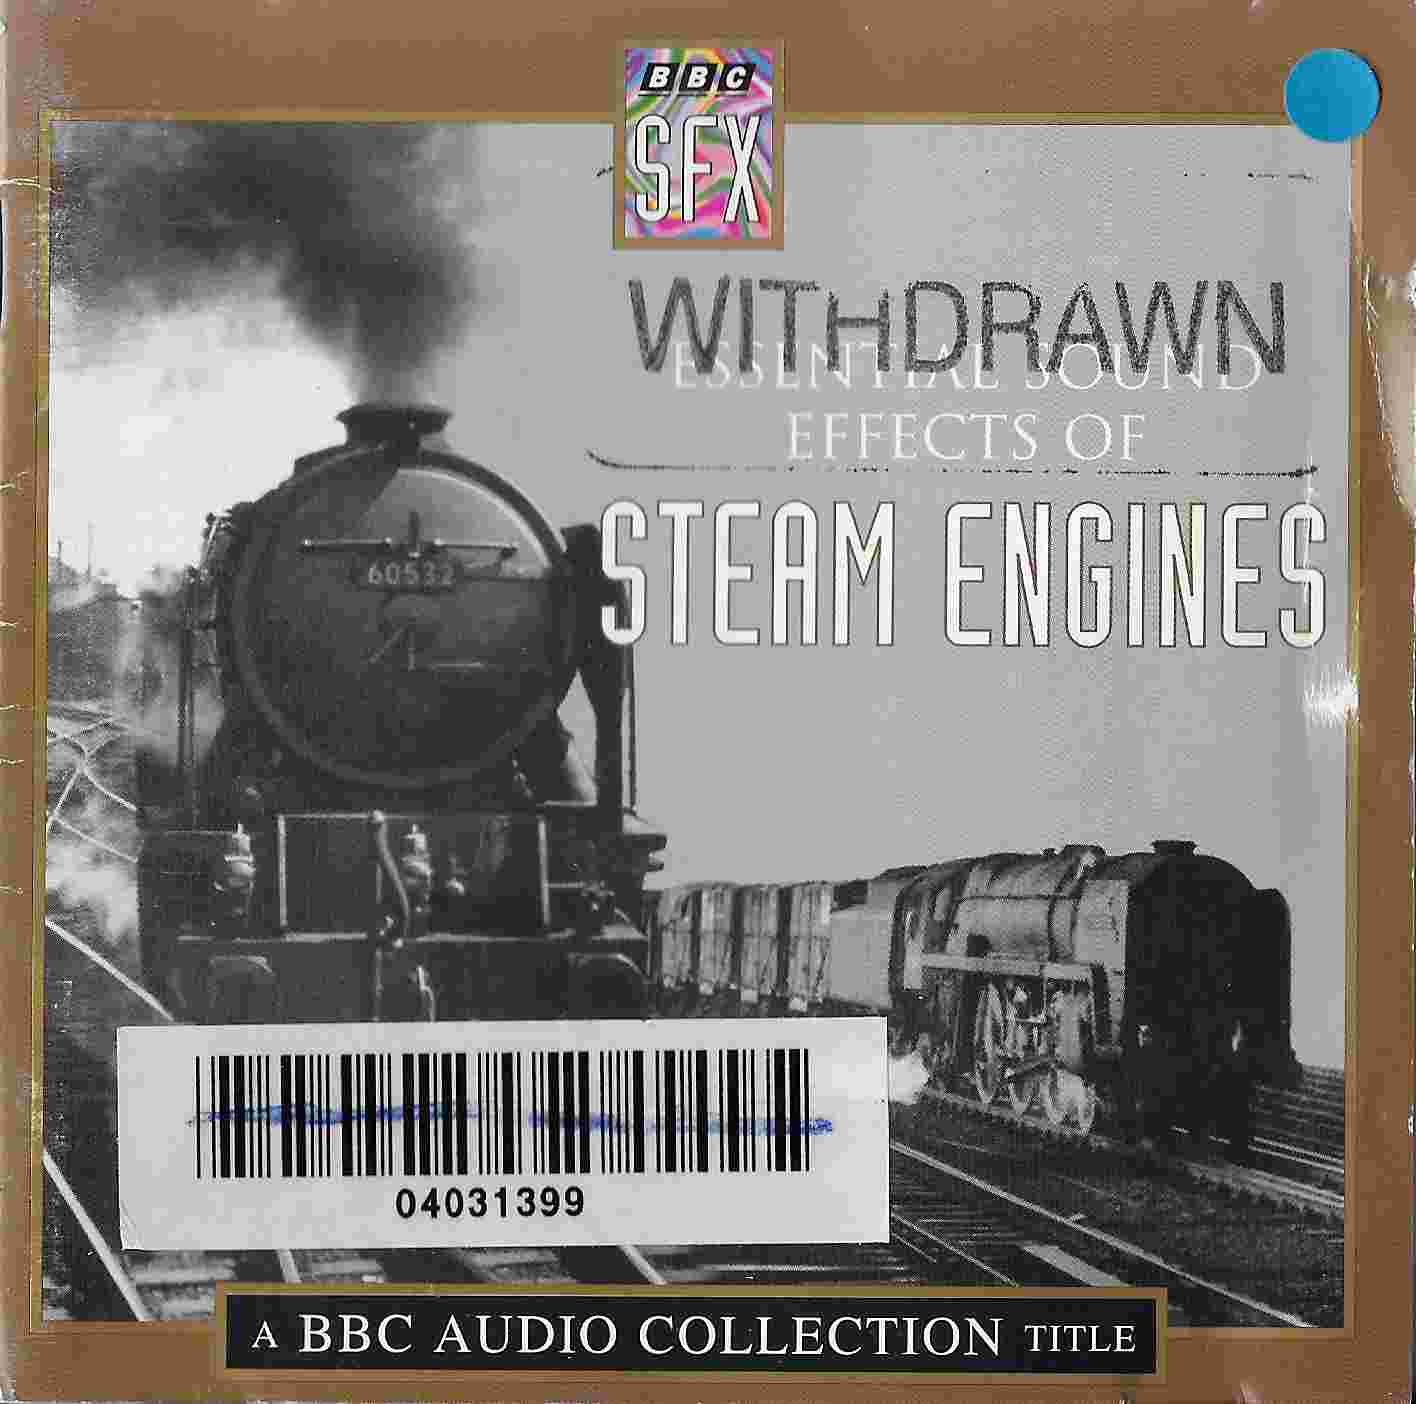 Picture of Essential sound effects of steam engines by artist Various from the BBC cds - Records and Tapes library